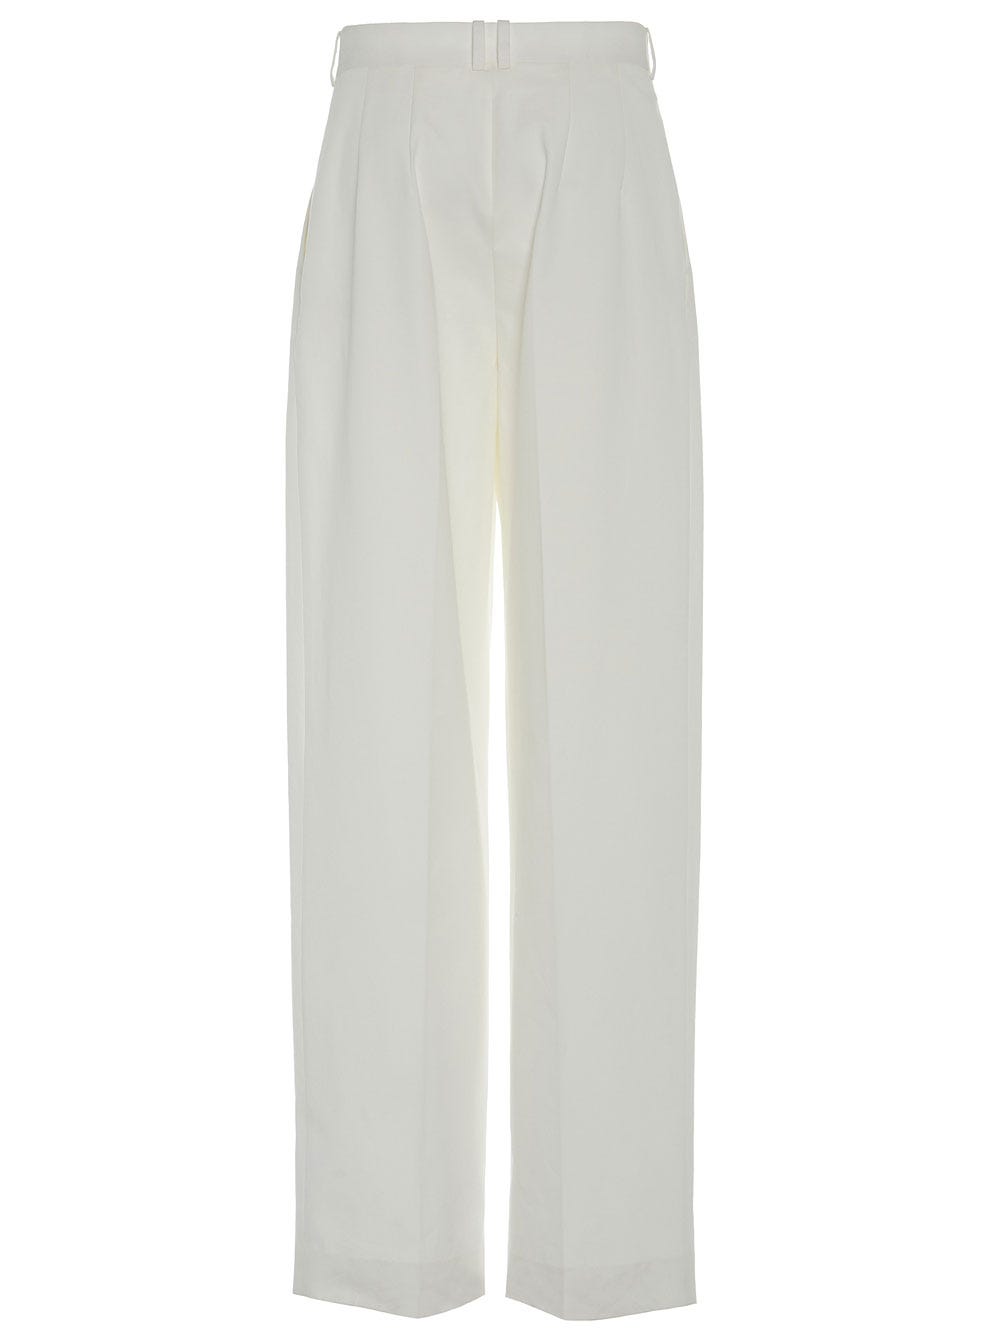 Low-waisted pant in washed cotton